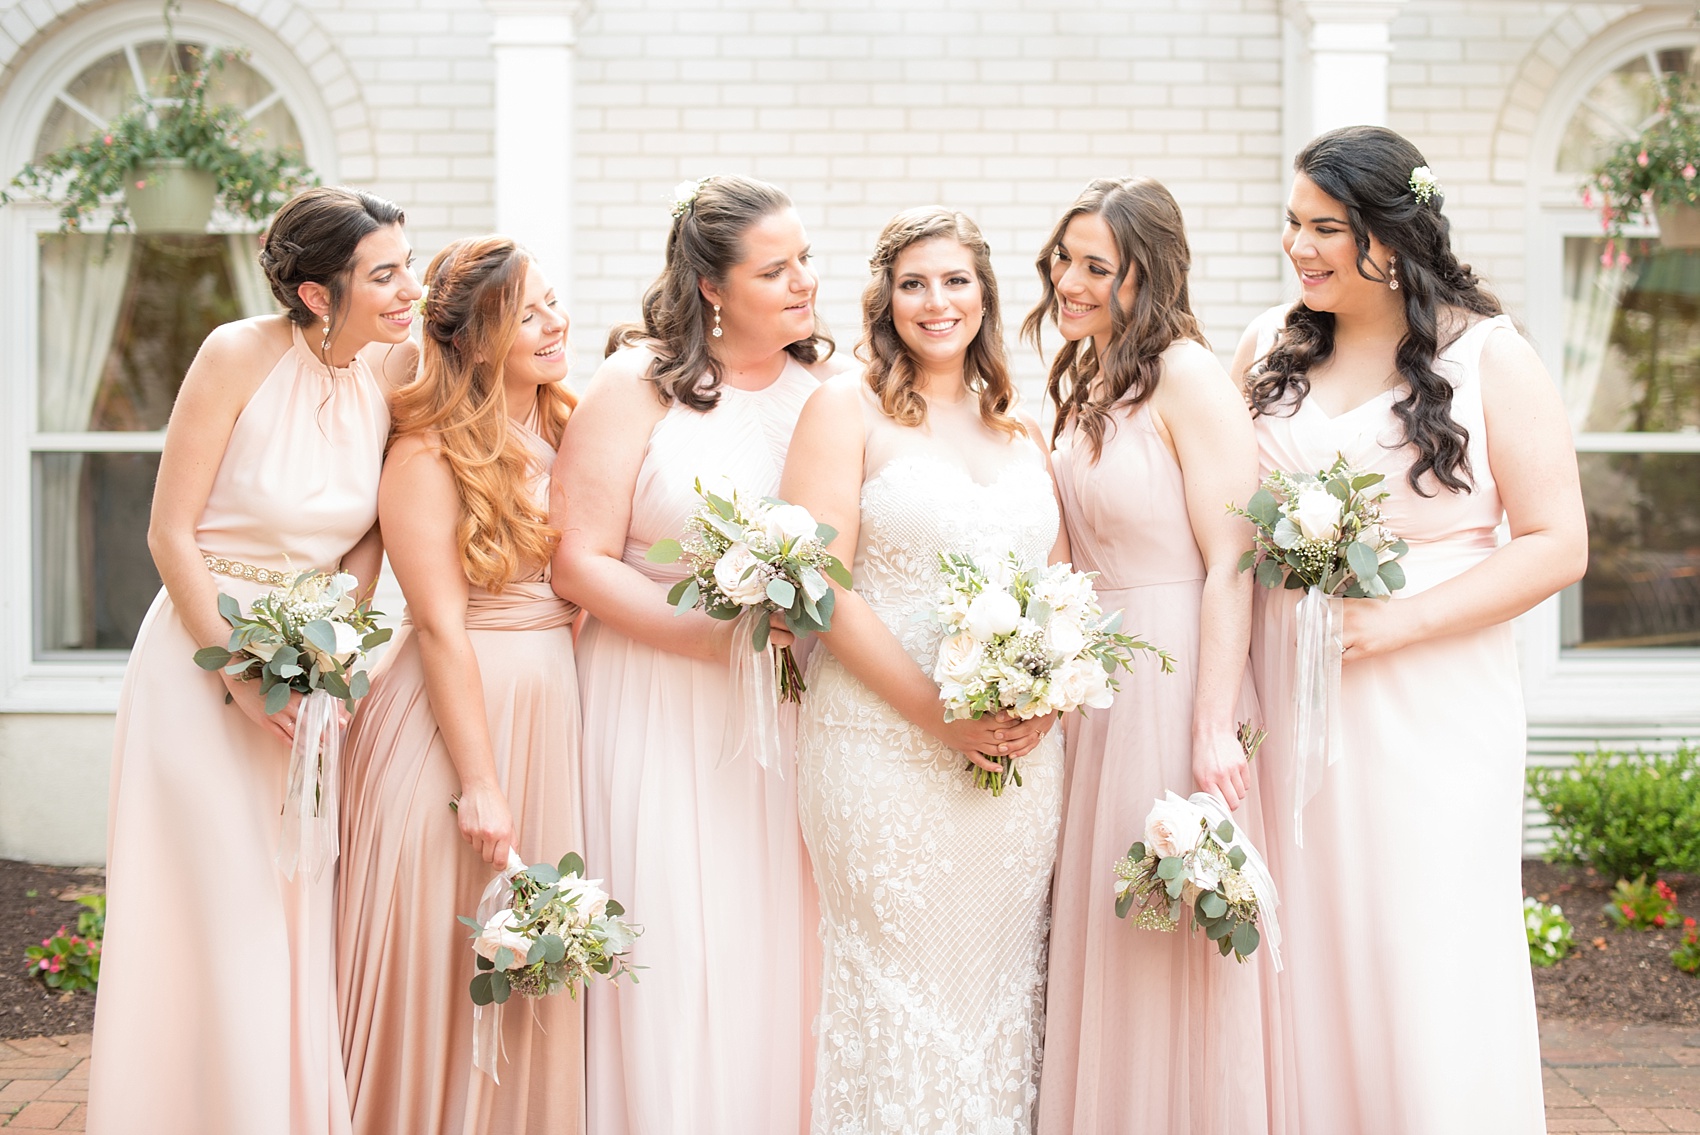 Mikkel Paige Photography photo of a wedding at Madison Hotel in NJ with the bridal party in light pink mismatched dresses with white rose and eucalyptus bouquets with long ribbons and the bride in a beaded BHLDN gown.